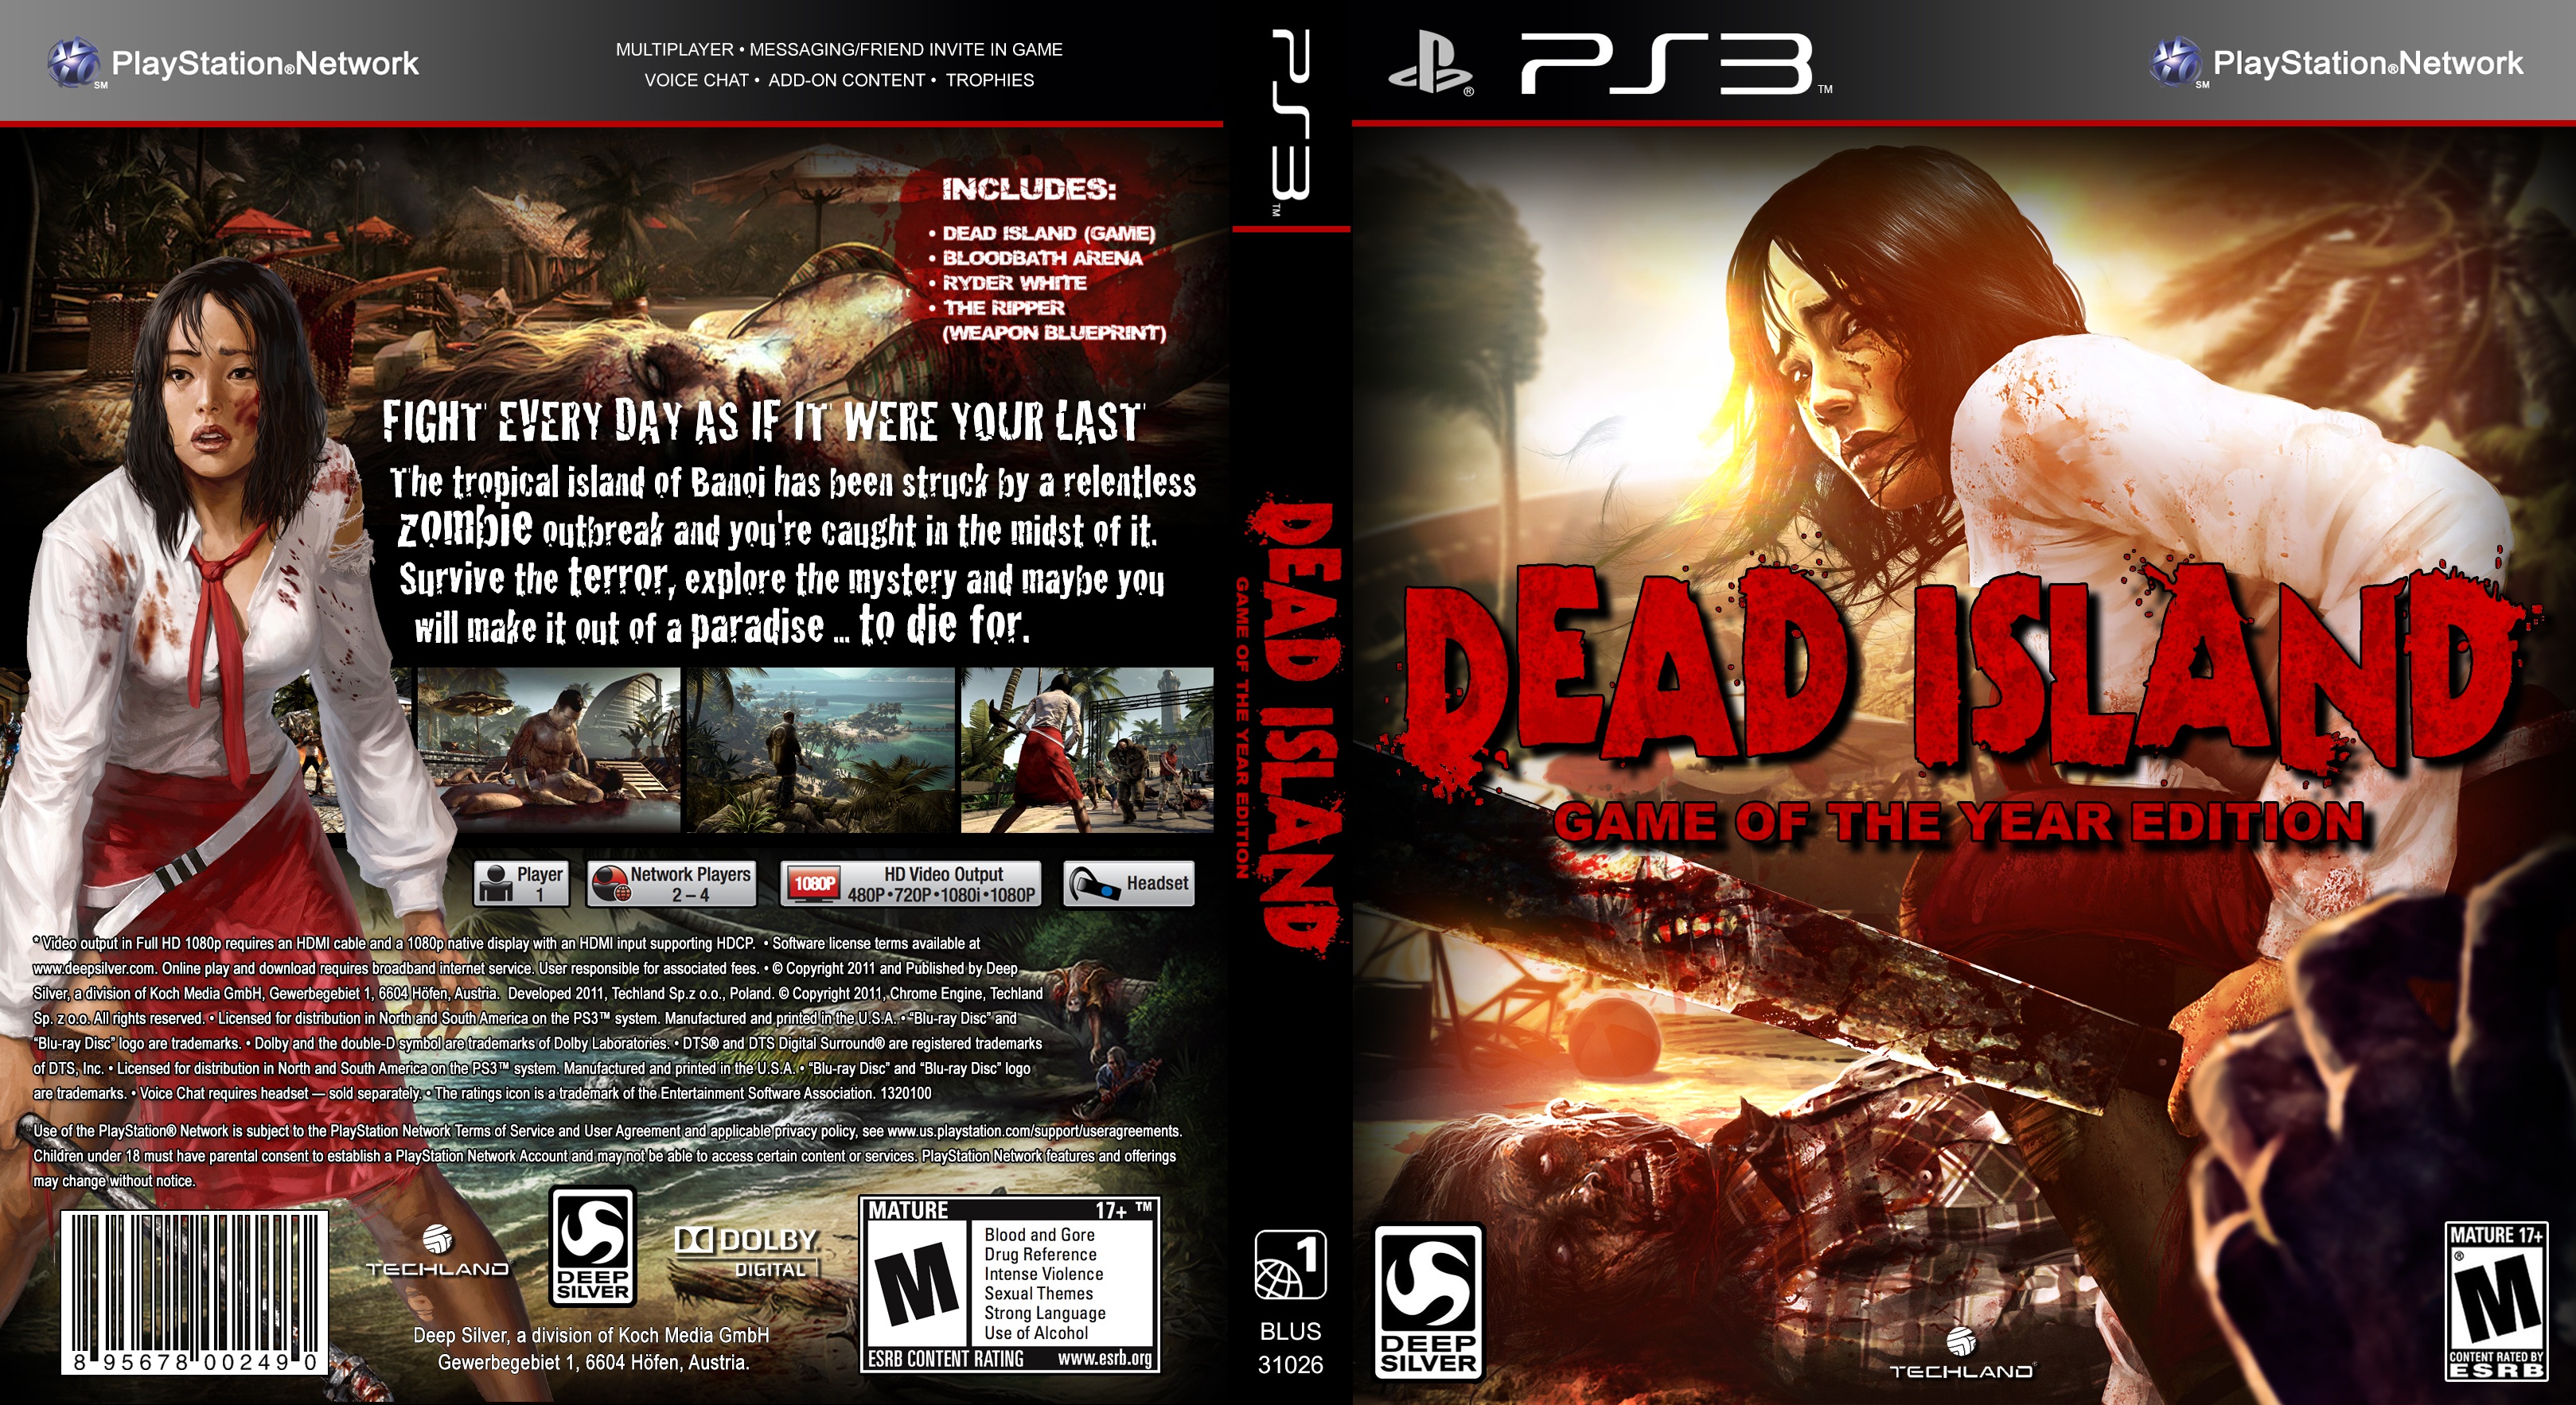 Dead Island: Game of the Year Edition box cover